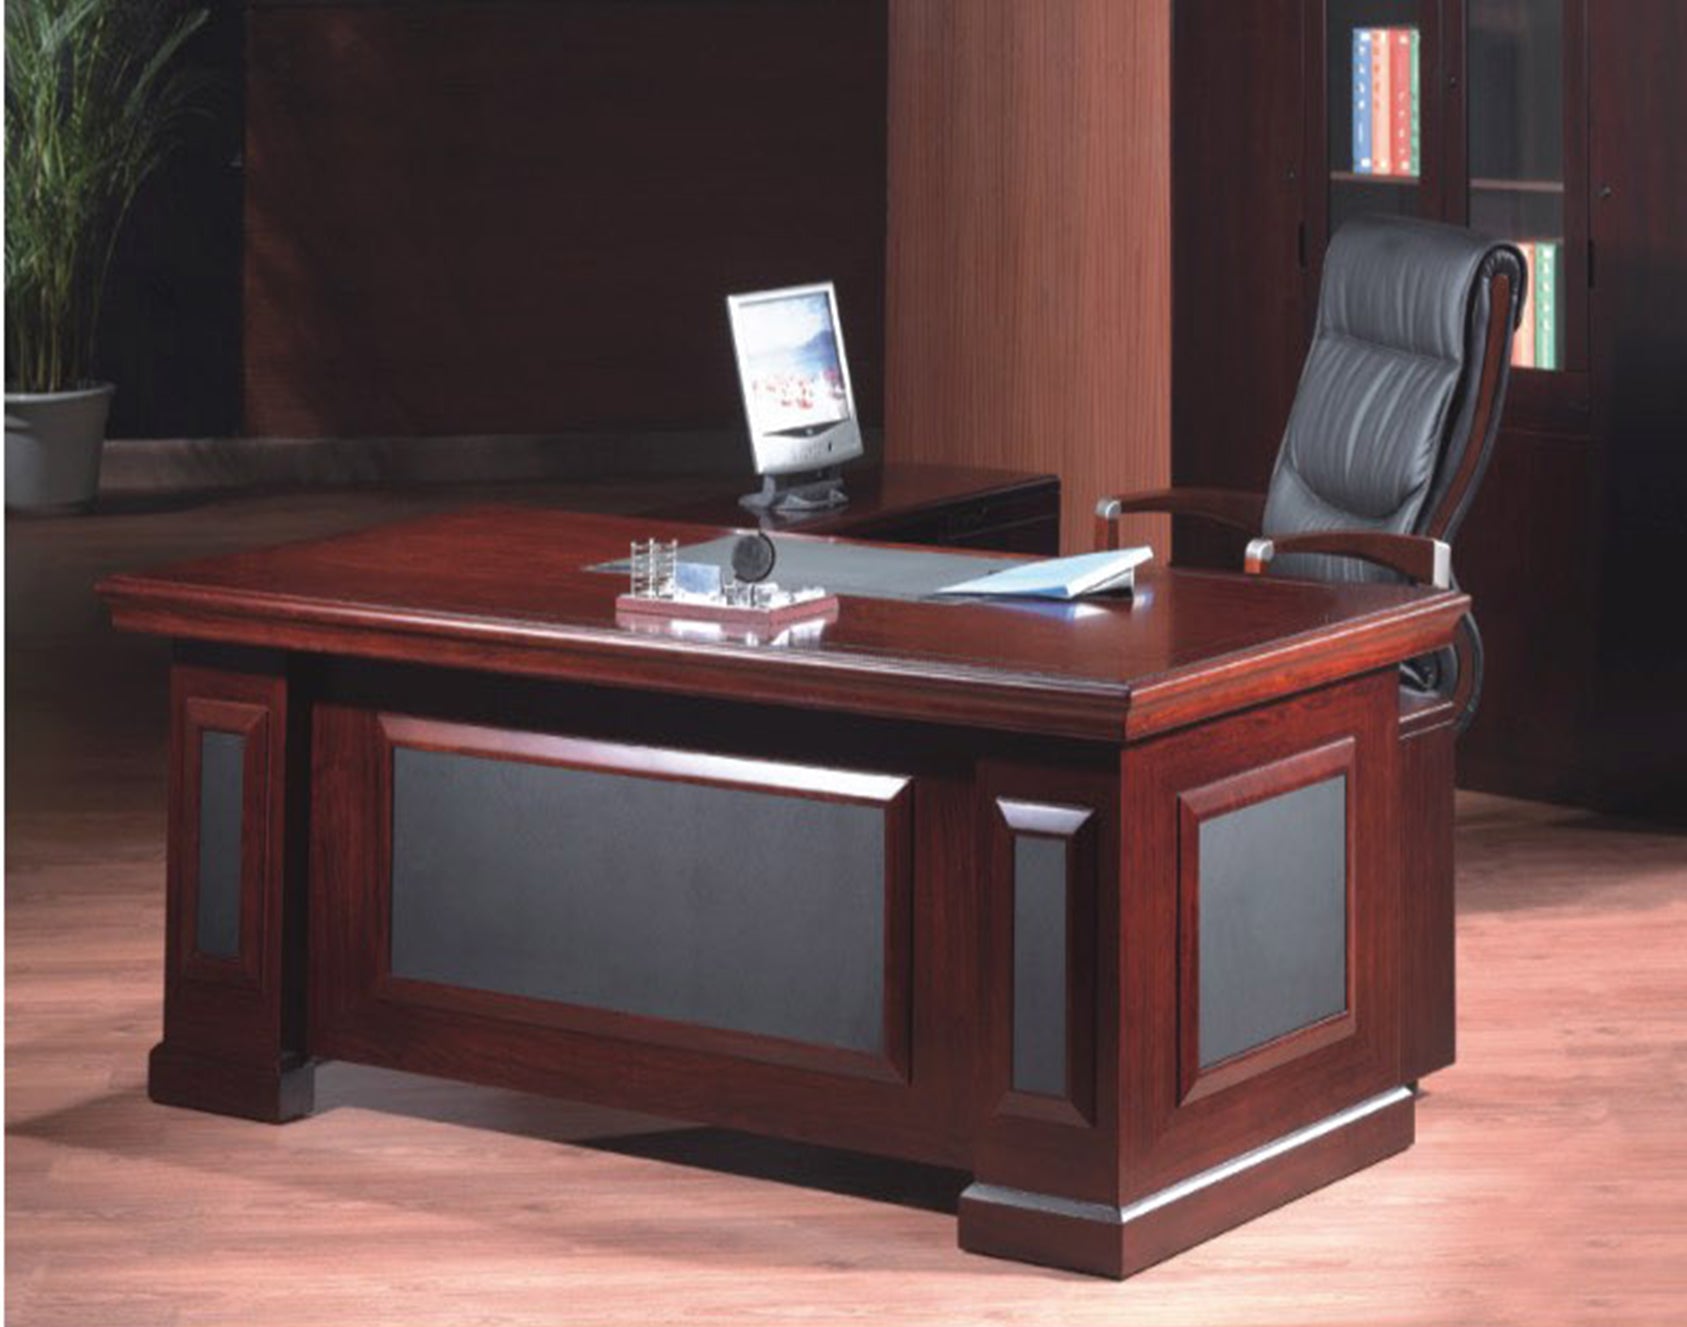 Mahogany Executive Desk With Leather Detailing - With Pedestal and Return - 1819 UK